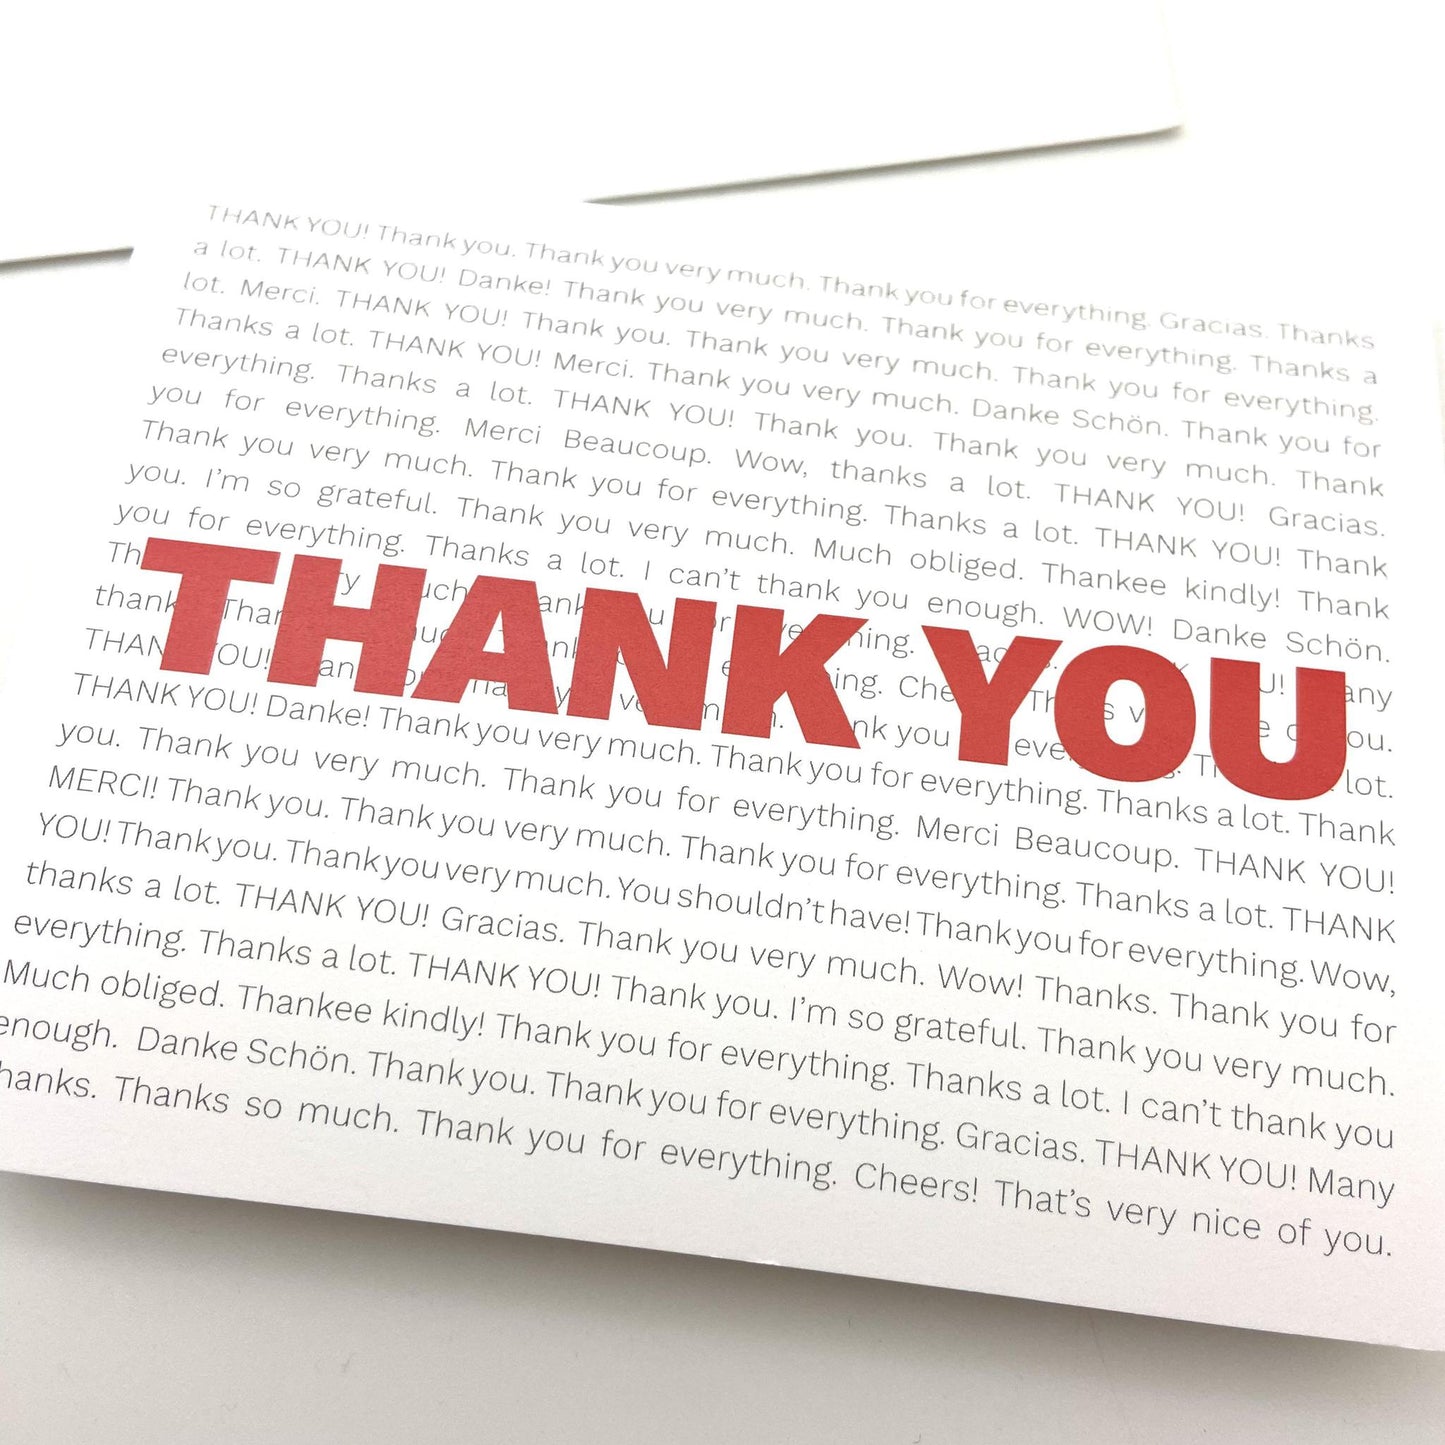 Greeting Card - "Thank You" on Thank Yous